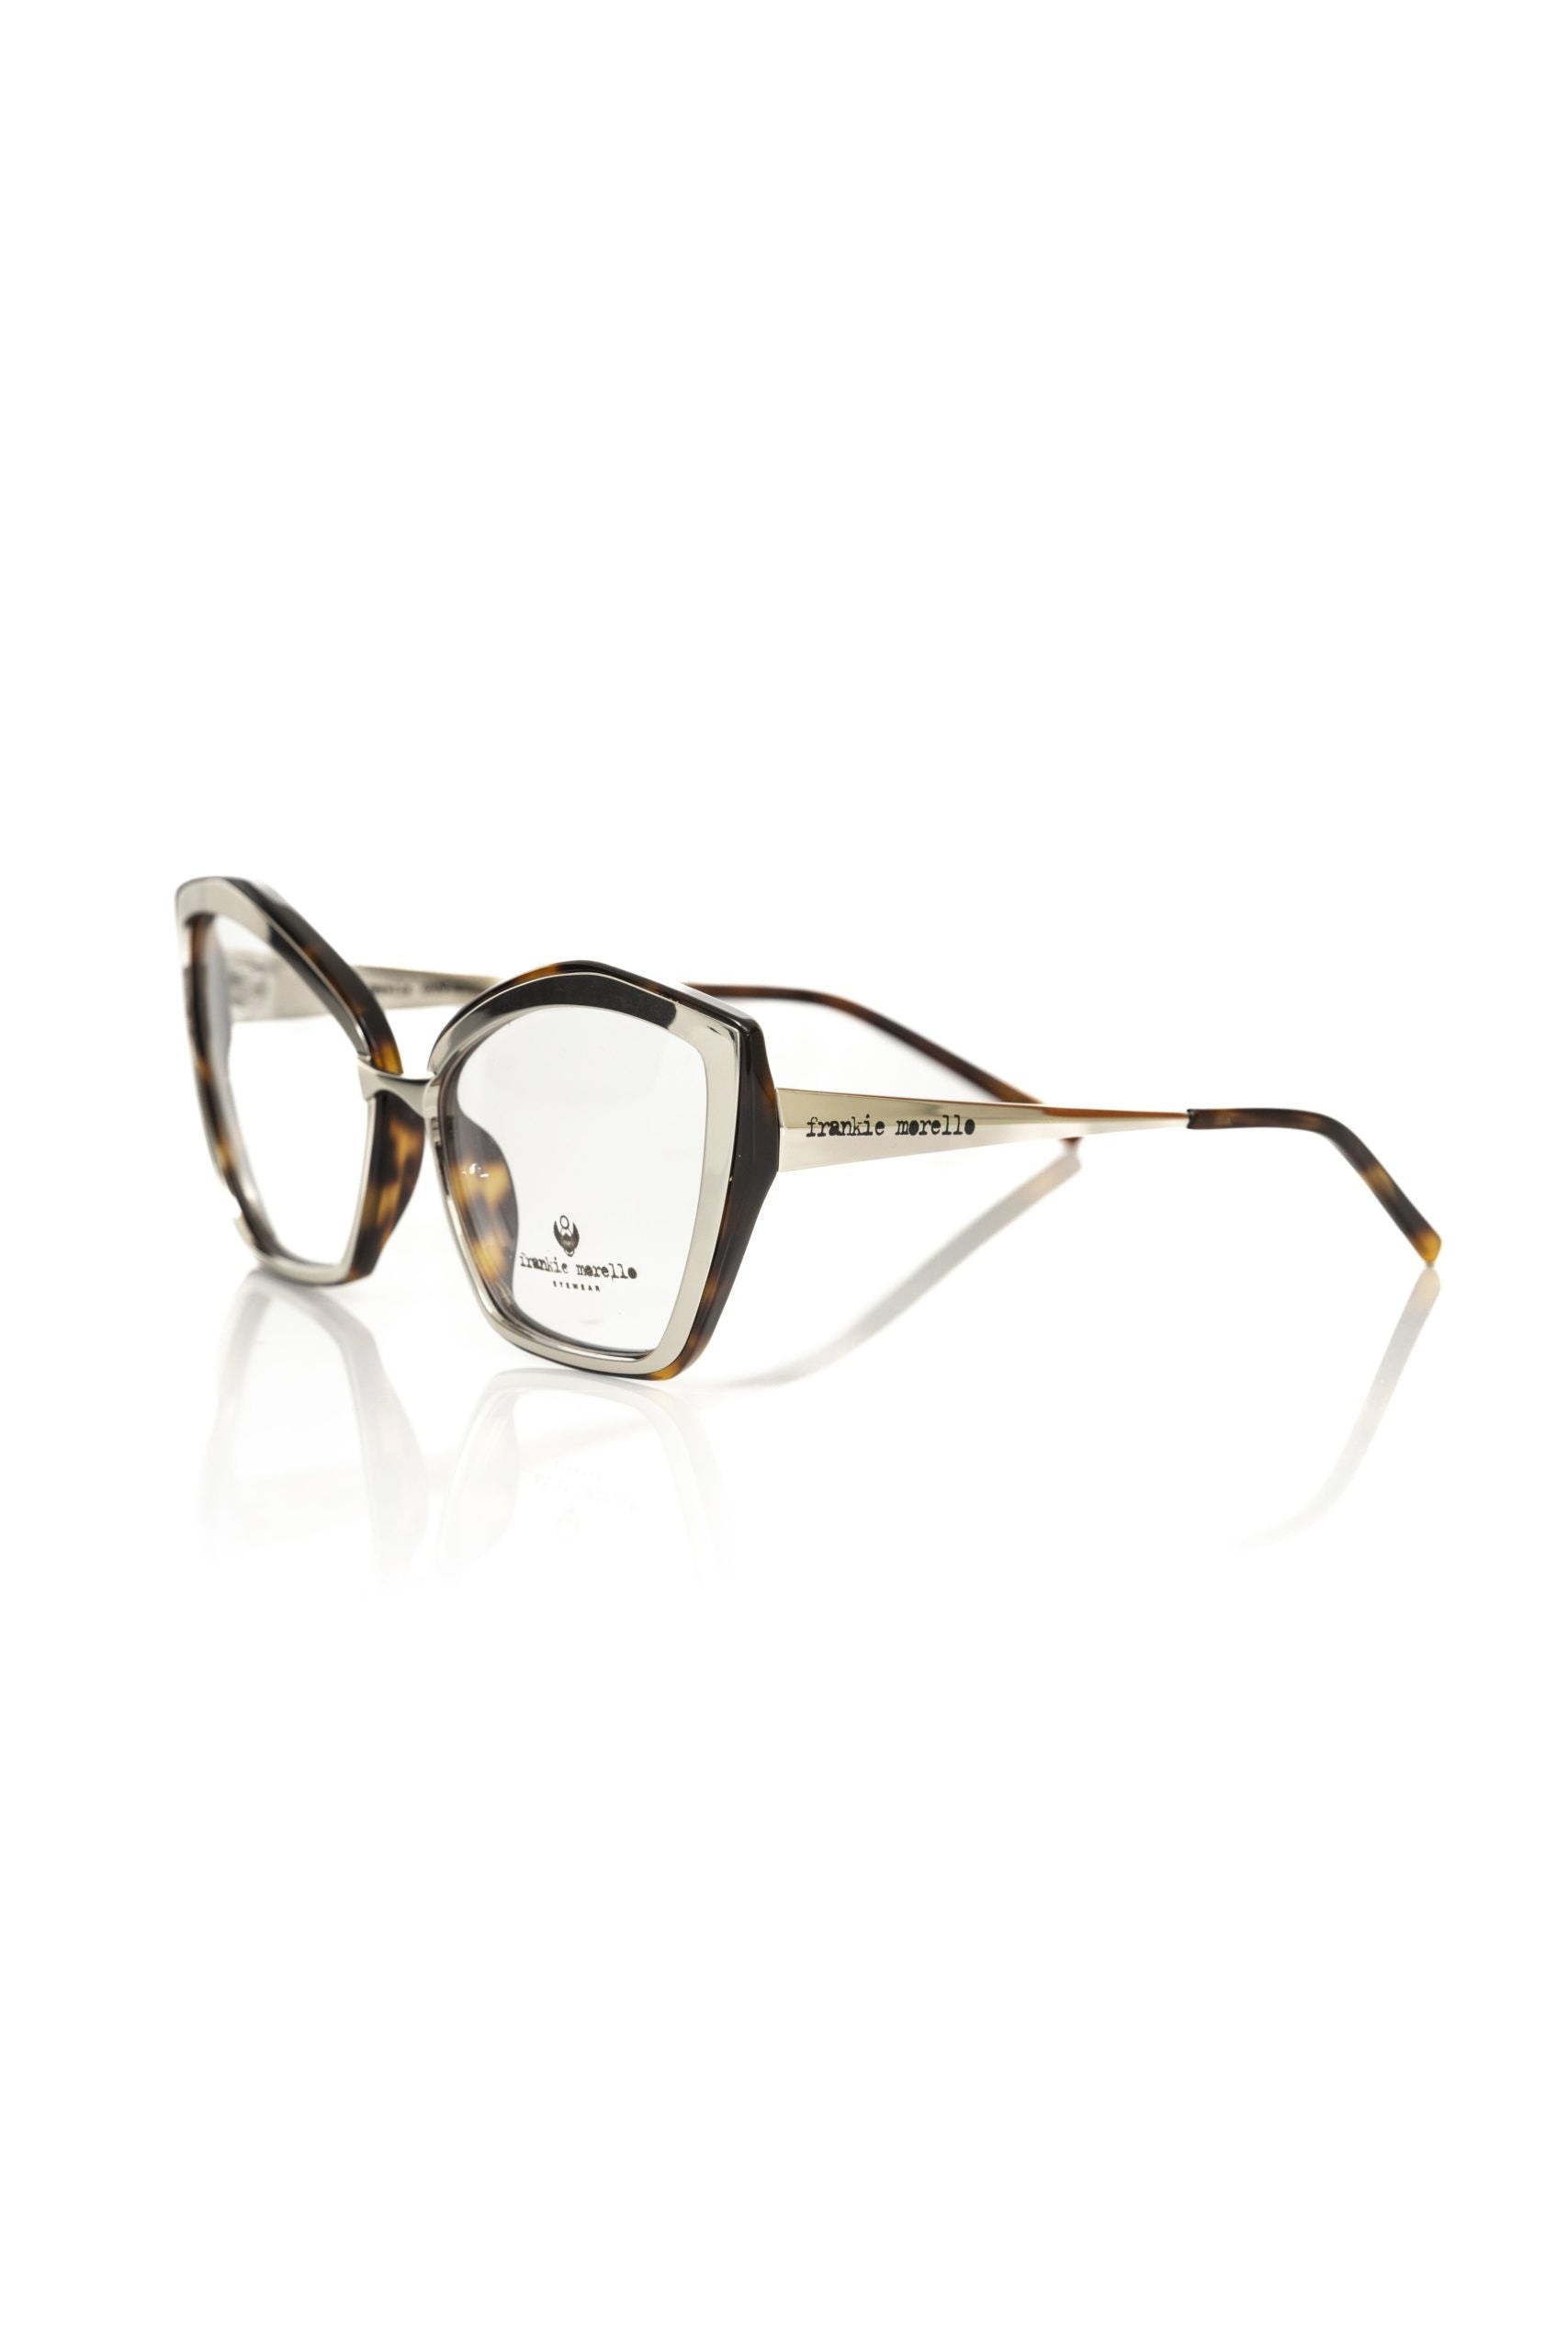 Frankie Morello FRMO-22094 Multicolor Acetate Frames - Designed by Frankie Morello Available to Buy at a Discounted Price on Moon Behind The Hill Online Designer Discount Store